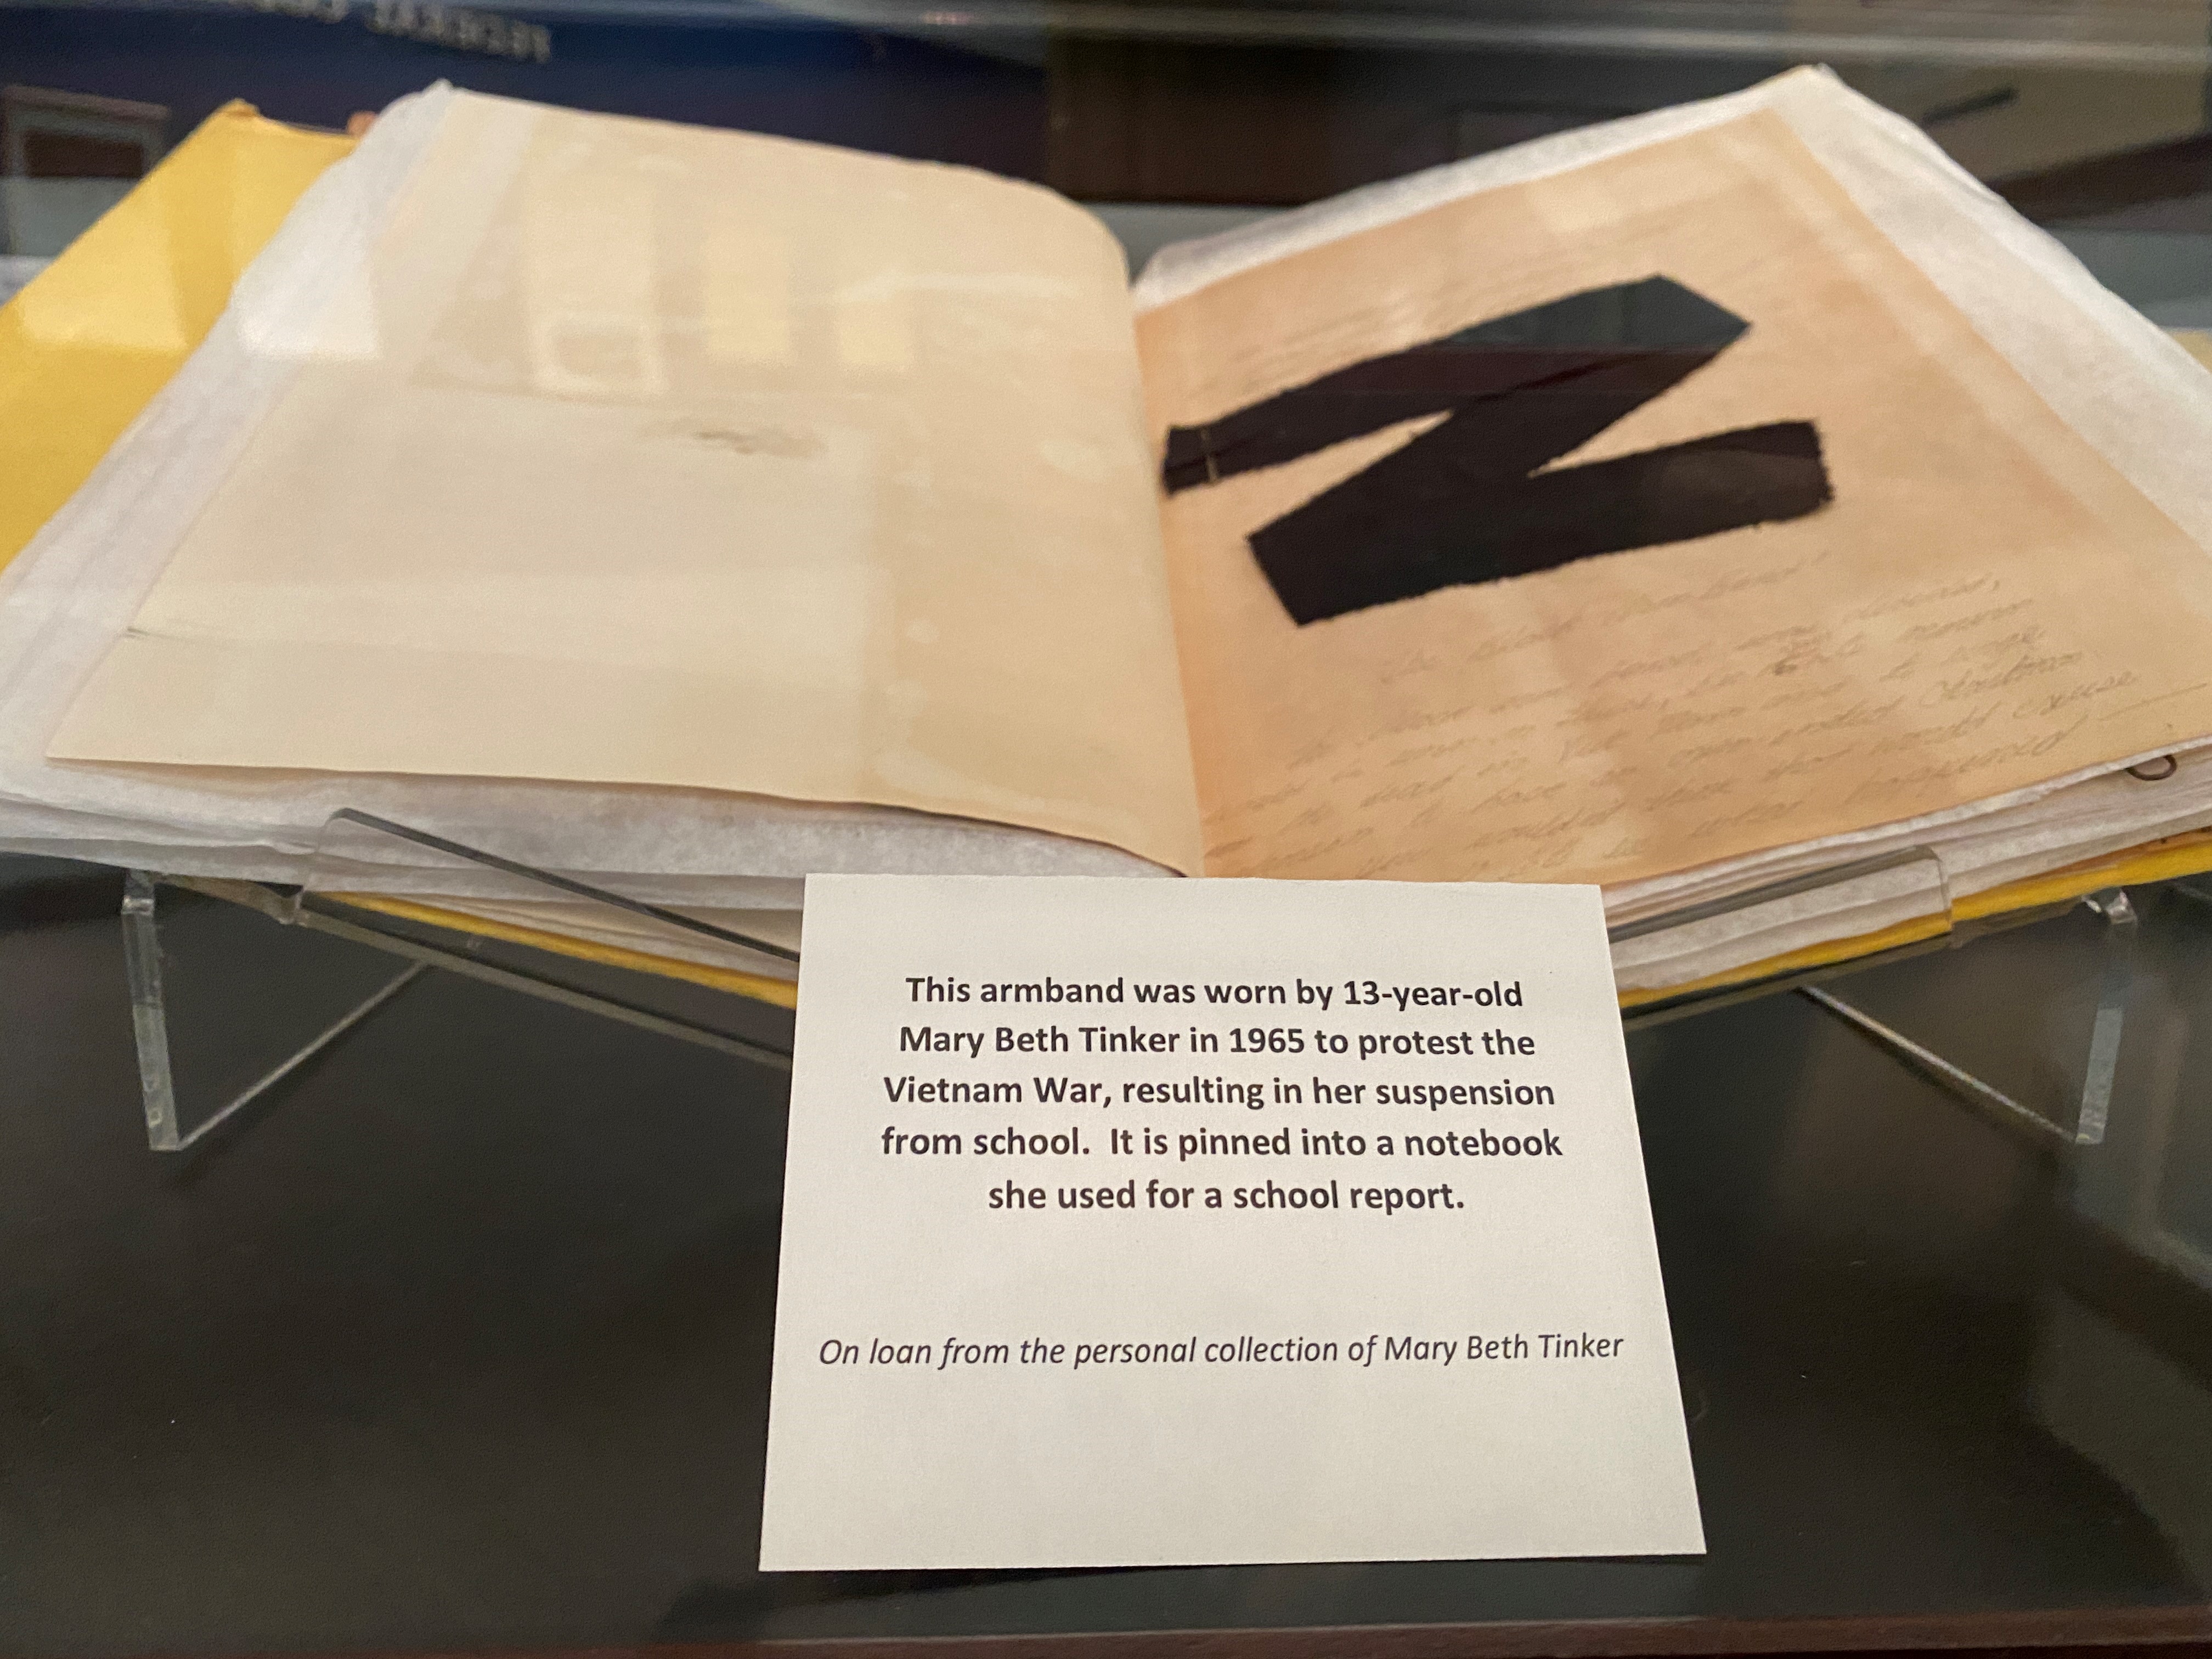 This armband was worn by 13-year-old Mary Beth Tinker in 1965 to protest the Vietnam War, resulting in her suspension from school. It is pinned into a notebook she used for a school report. On loan from the personal collection of Mary Beth Tinker.